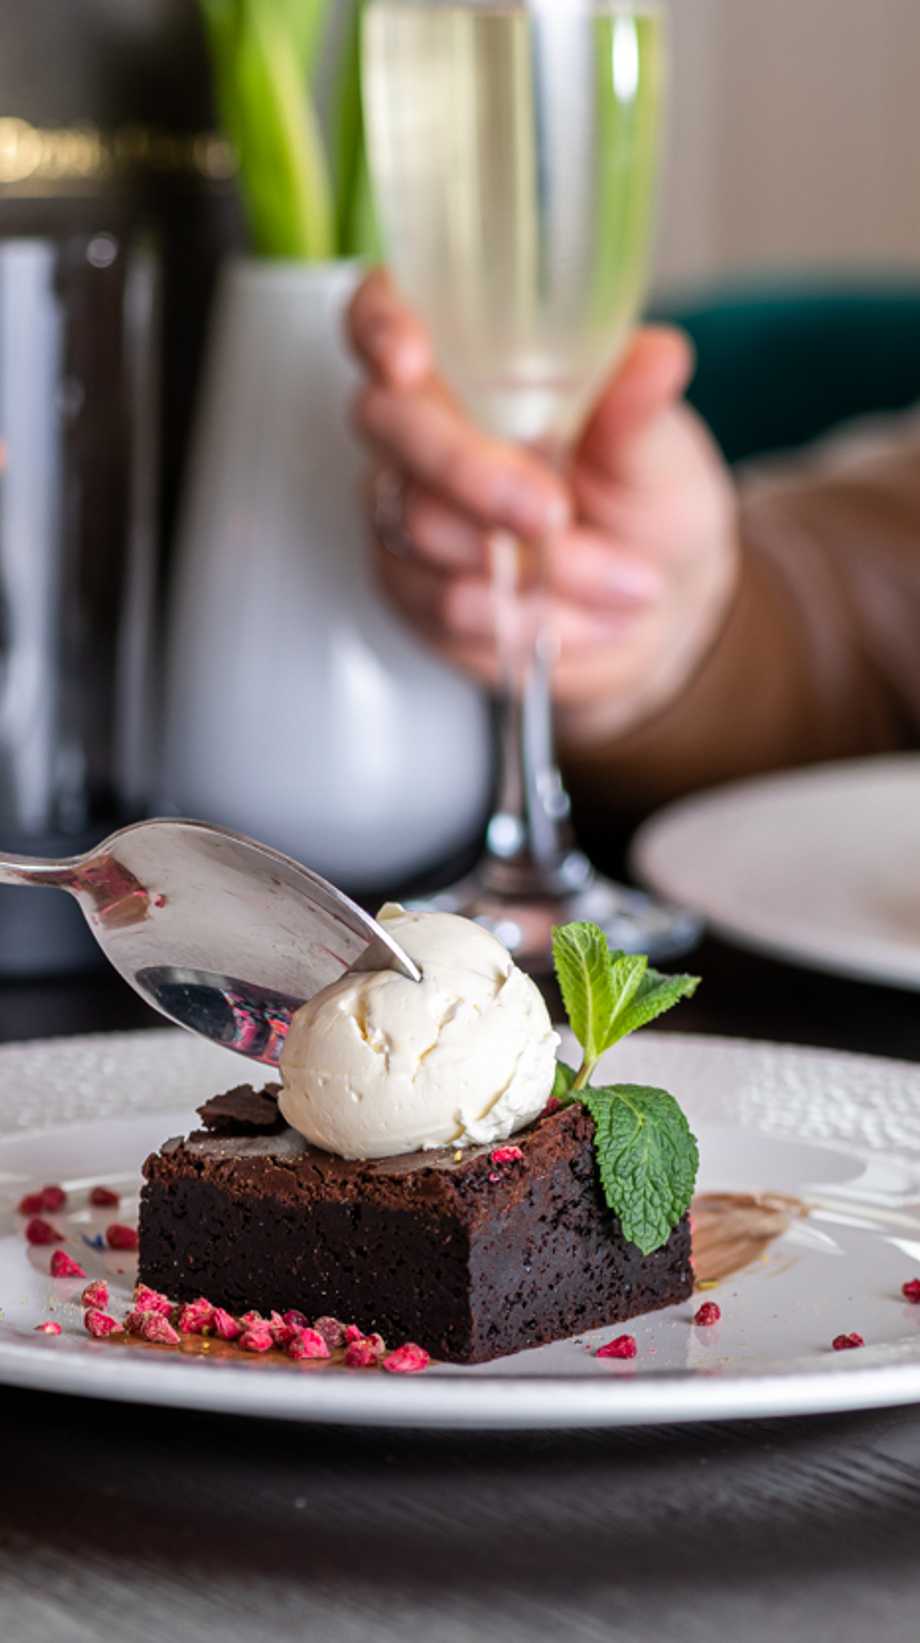 A guest is about to start eating a chocolate brownie with ice cream on top. In the background, a guest reaches for their drink.